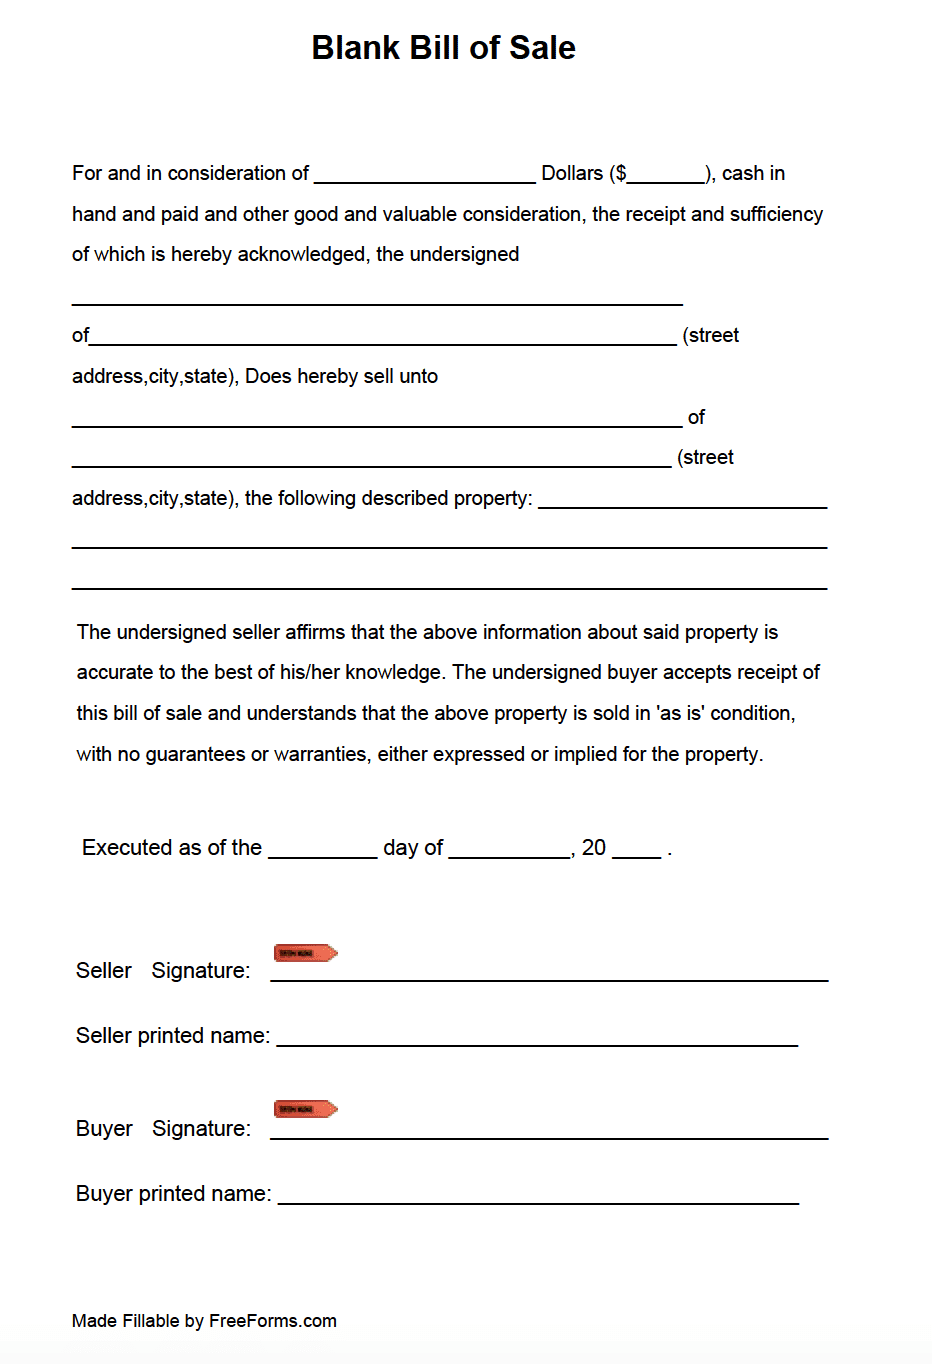 motorcycle-bill-of-sale-free-printable-documents